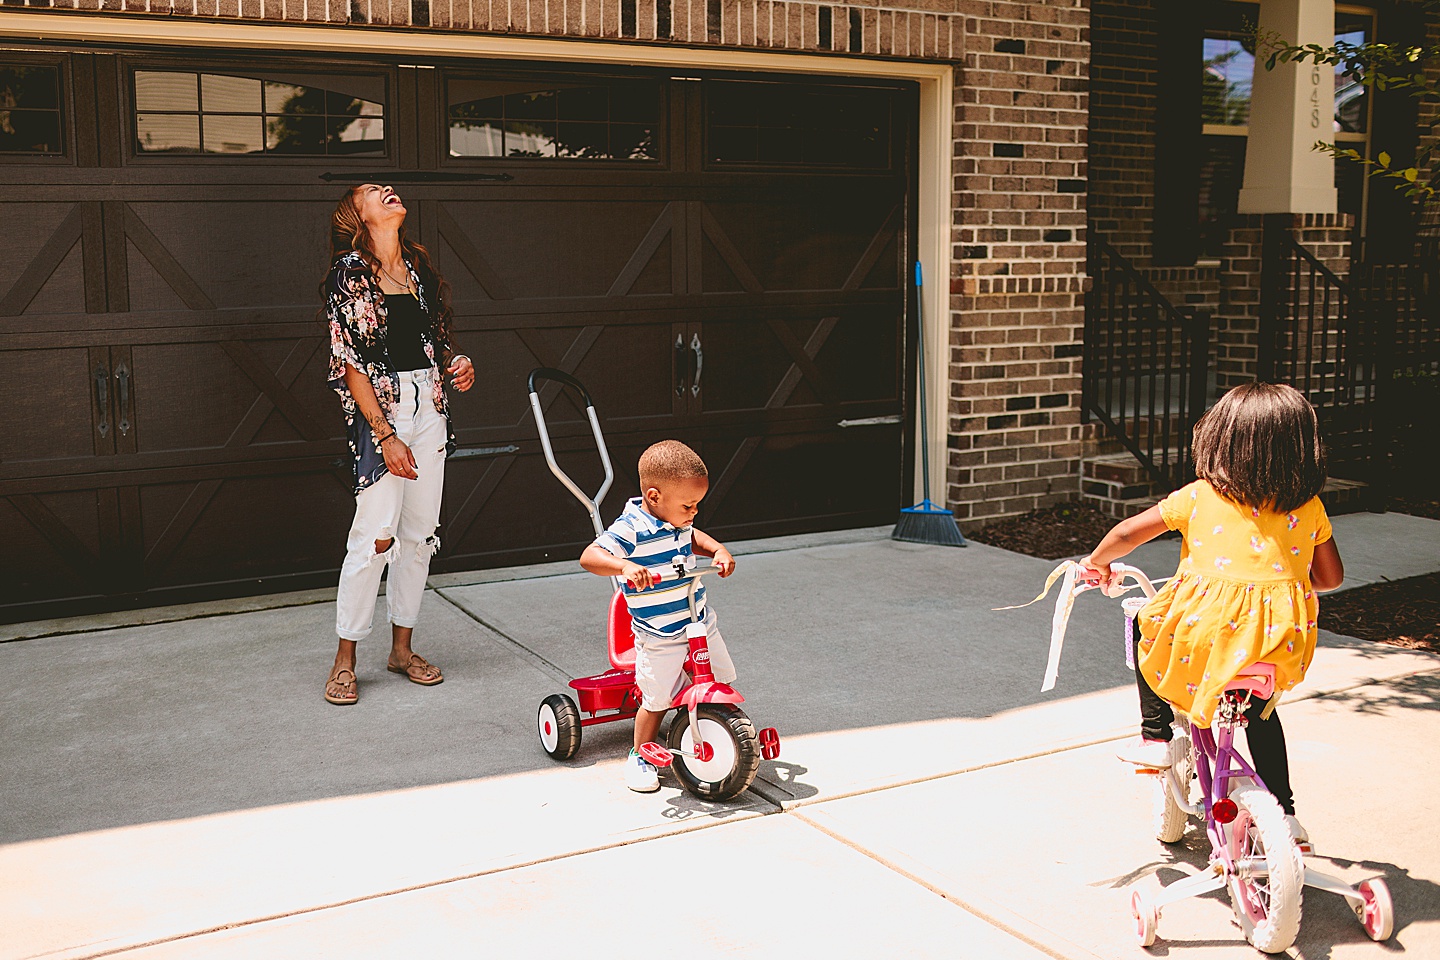 Kids riding bikes with their mom outside in the driveway